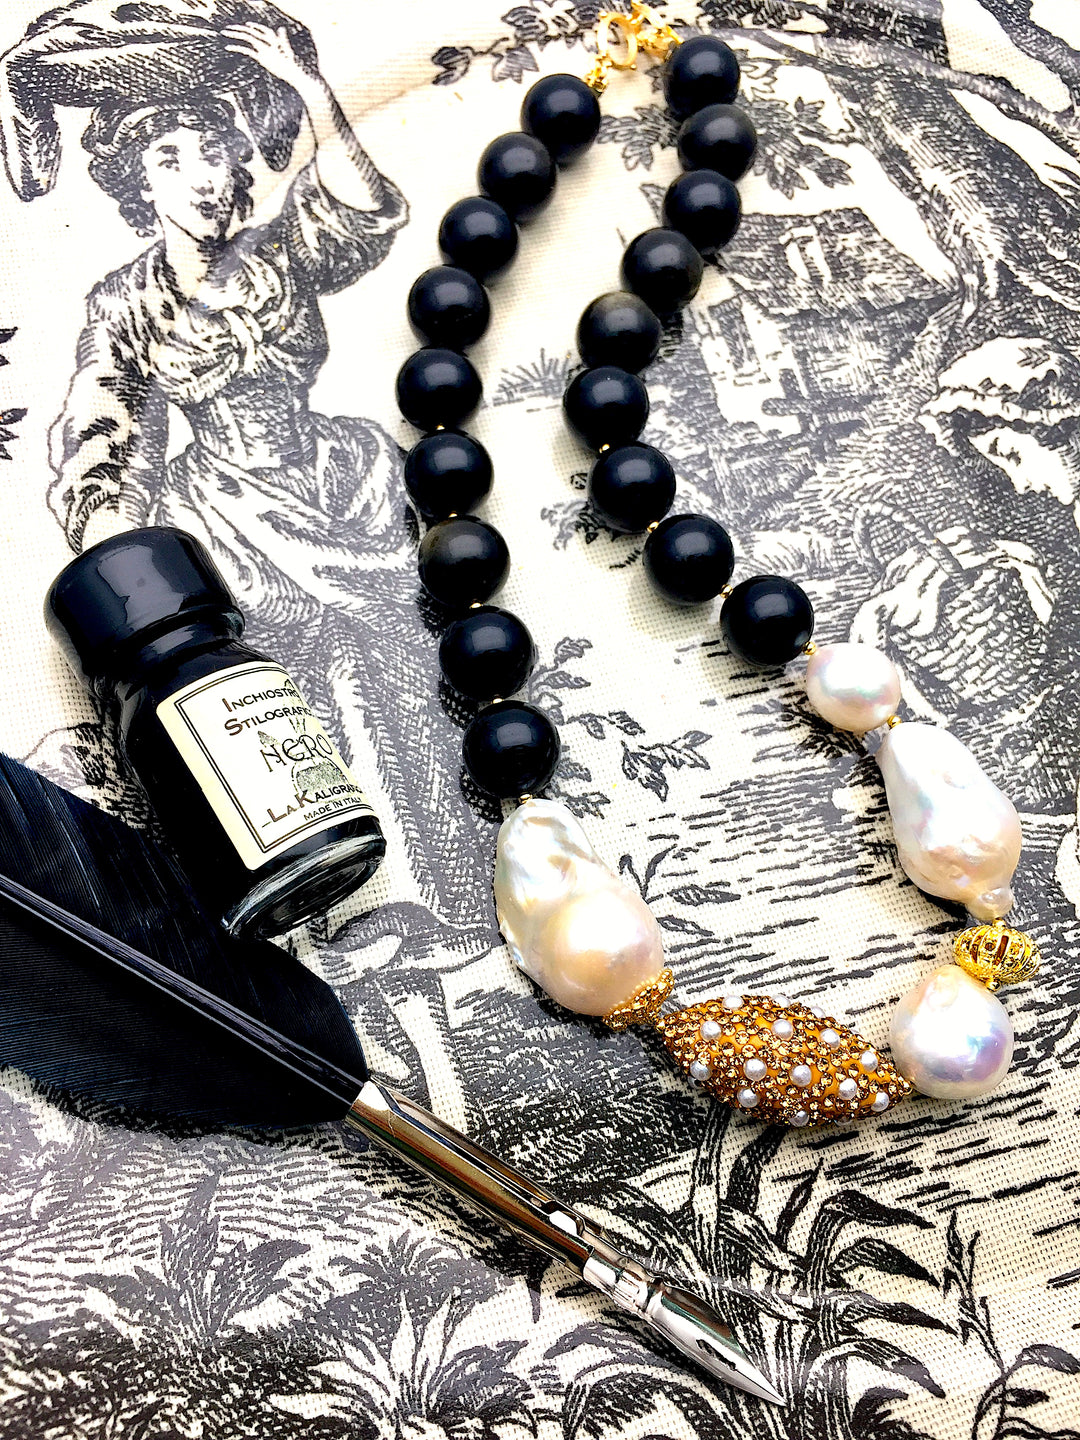 Black Obsidian With Baroque Pearl Gorgeous Necklace CN047 - FARRA